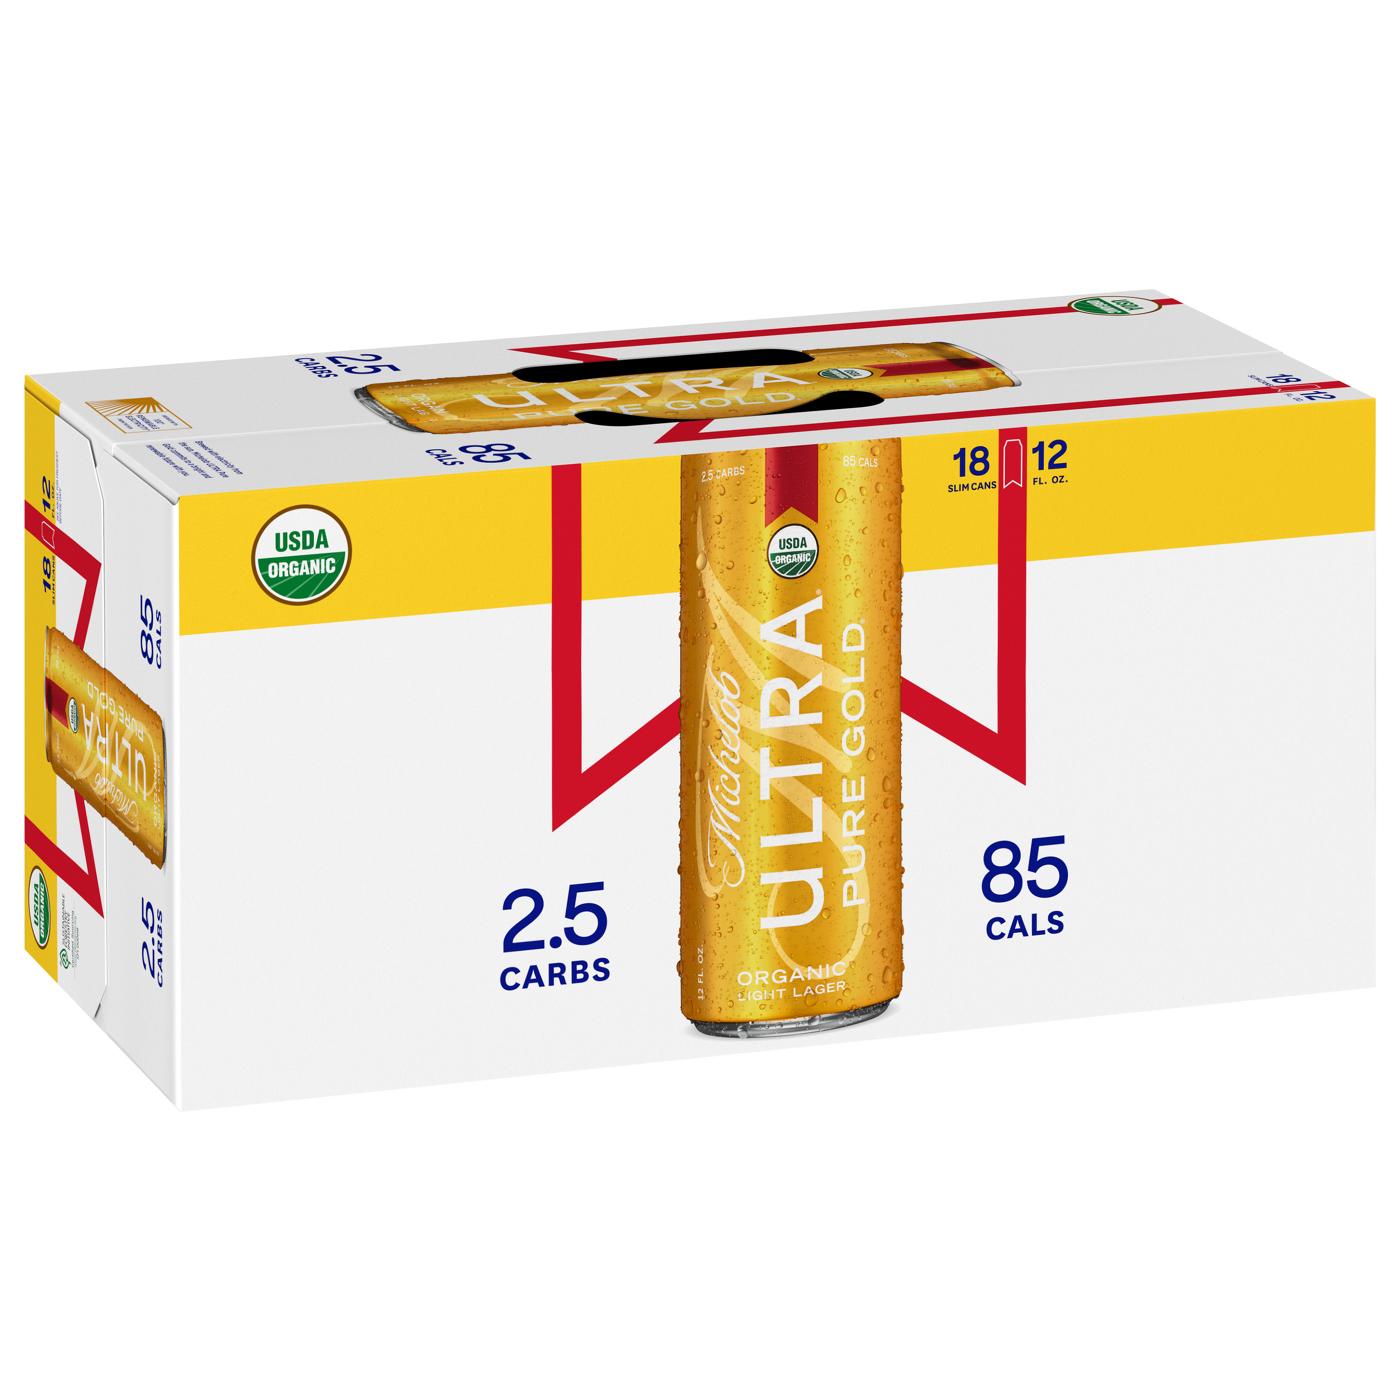 Michelob Ultra Pure Gold Organic Light Lager Beer 12 oz Cans; image 1 of 2